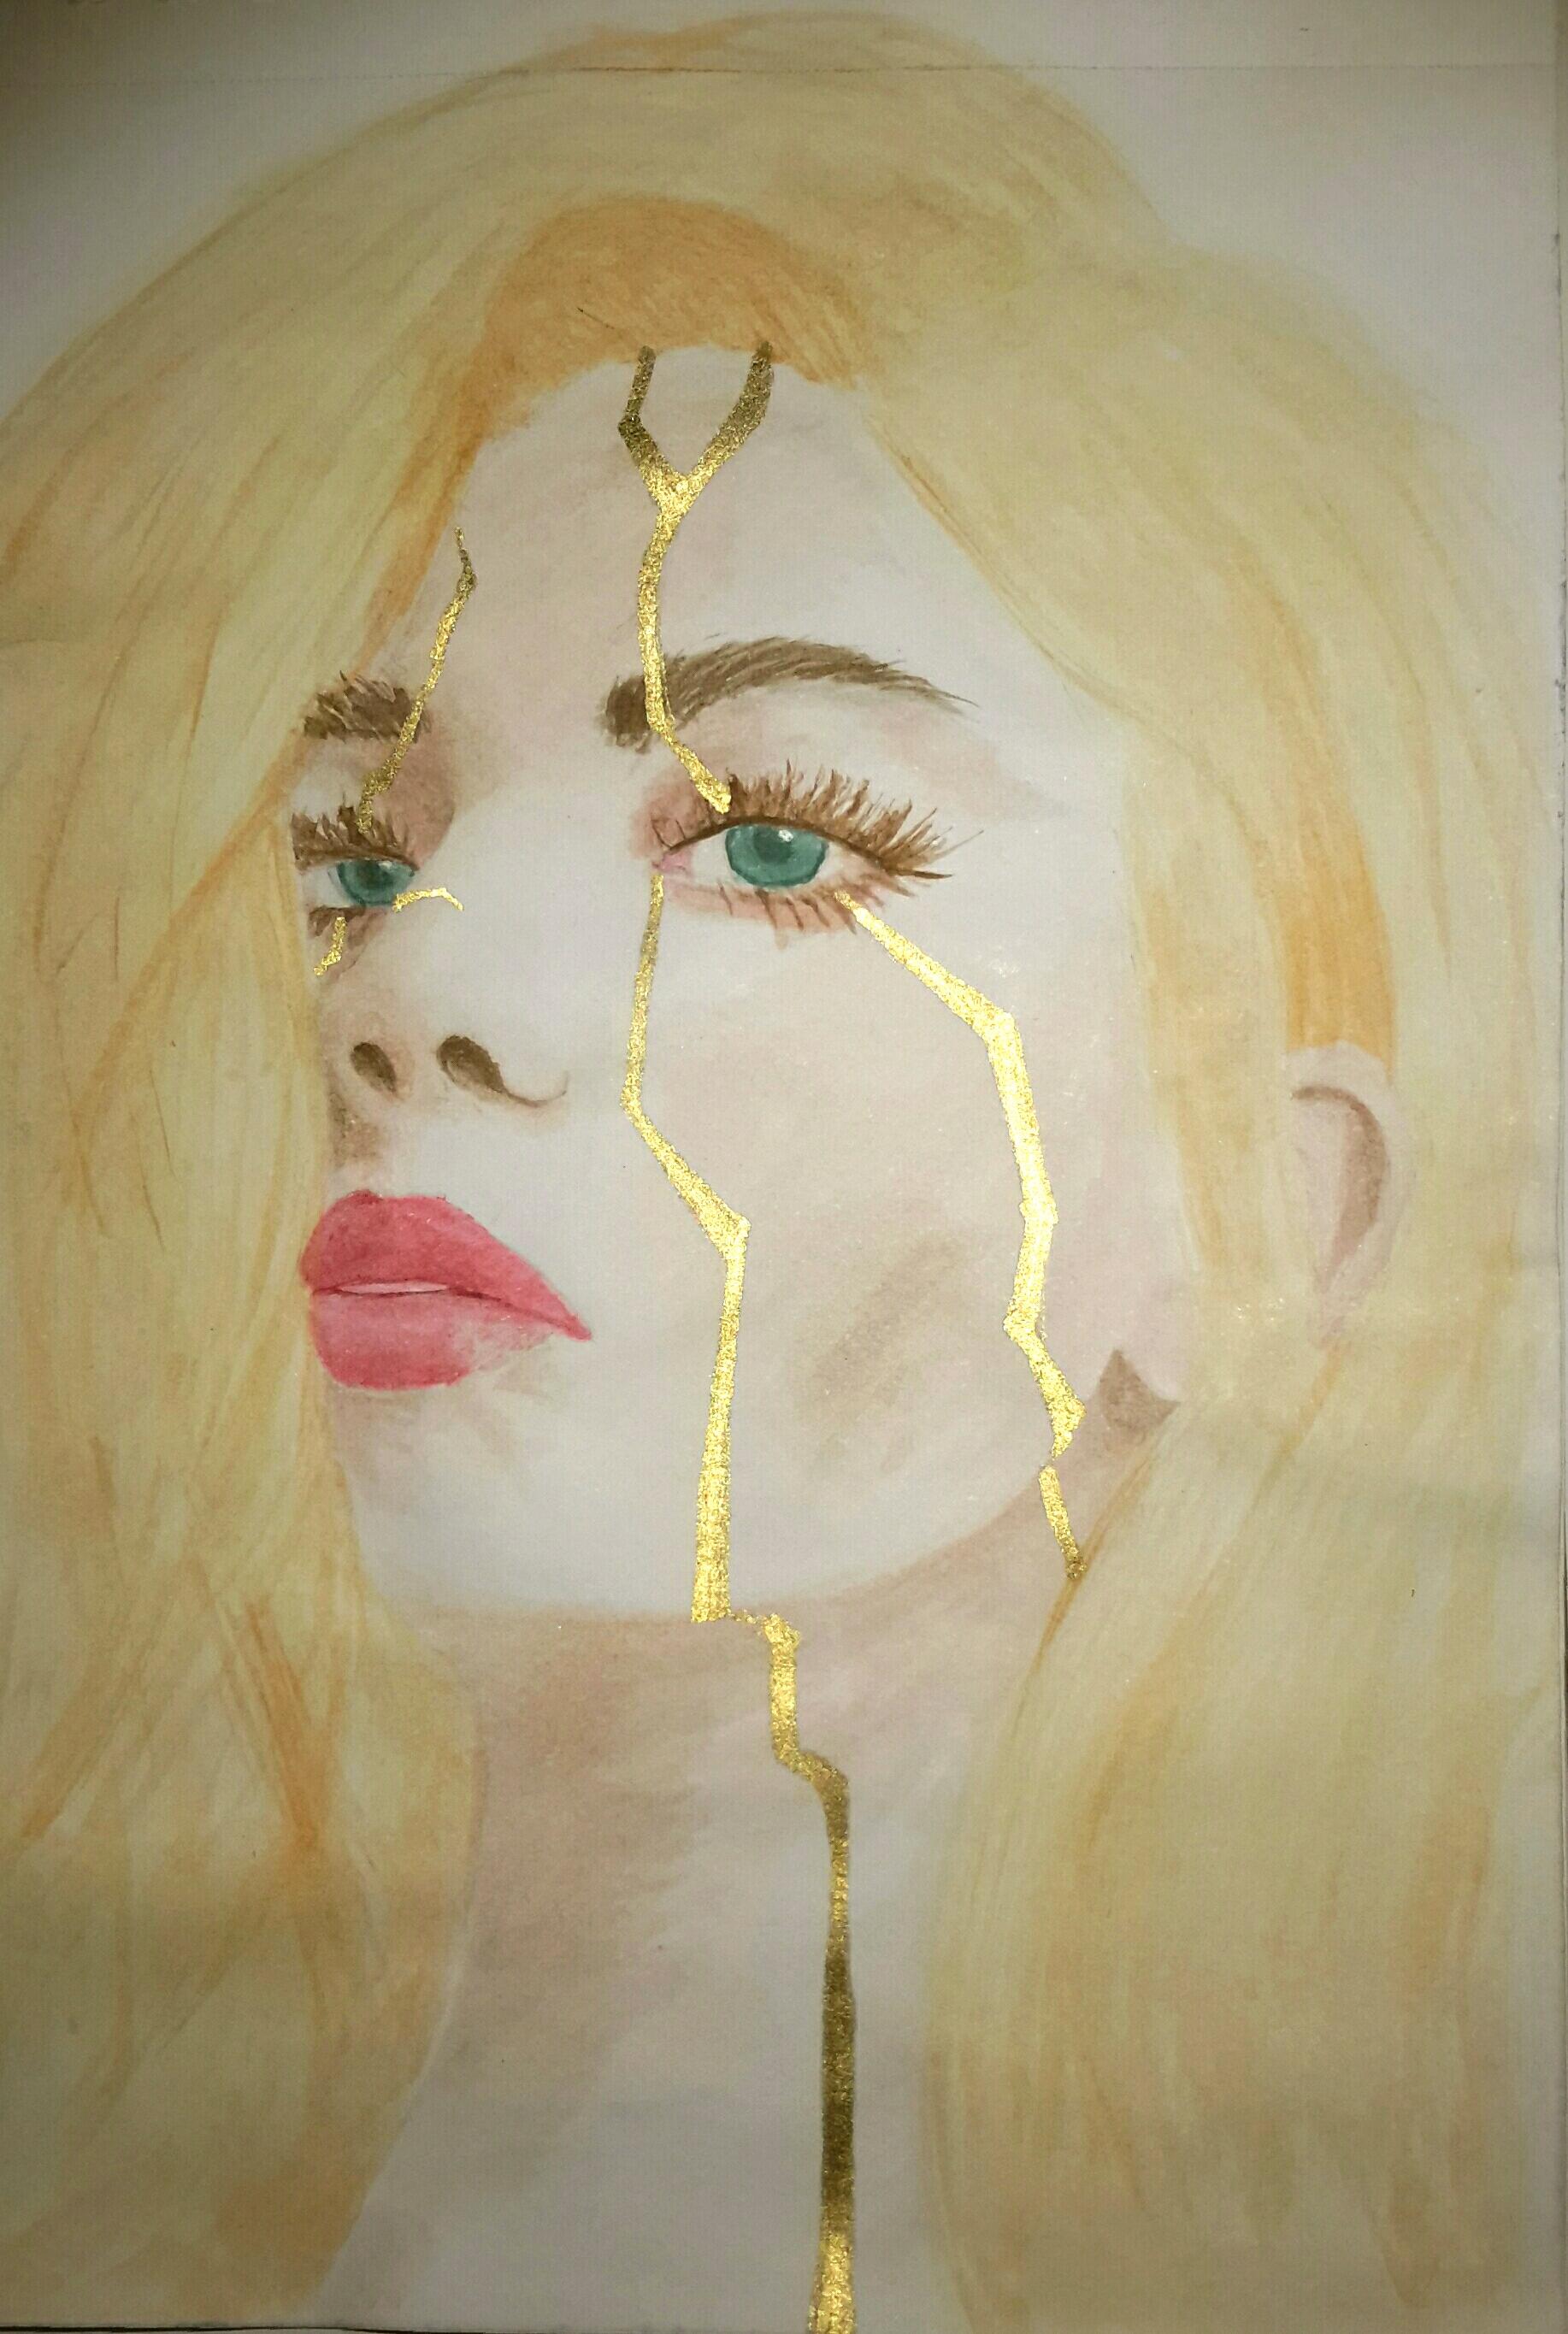 A defiant yet solemn female portrait with jagged golden lines to emulate the golden lines traditionally seen in Kintsugi pottery